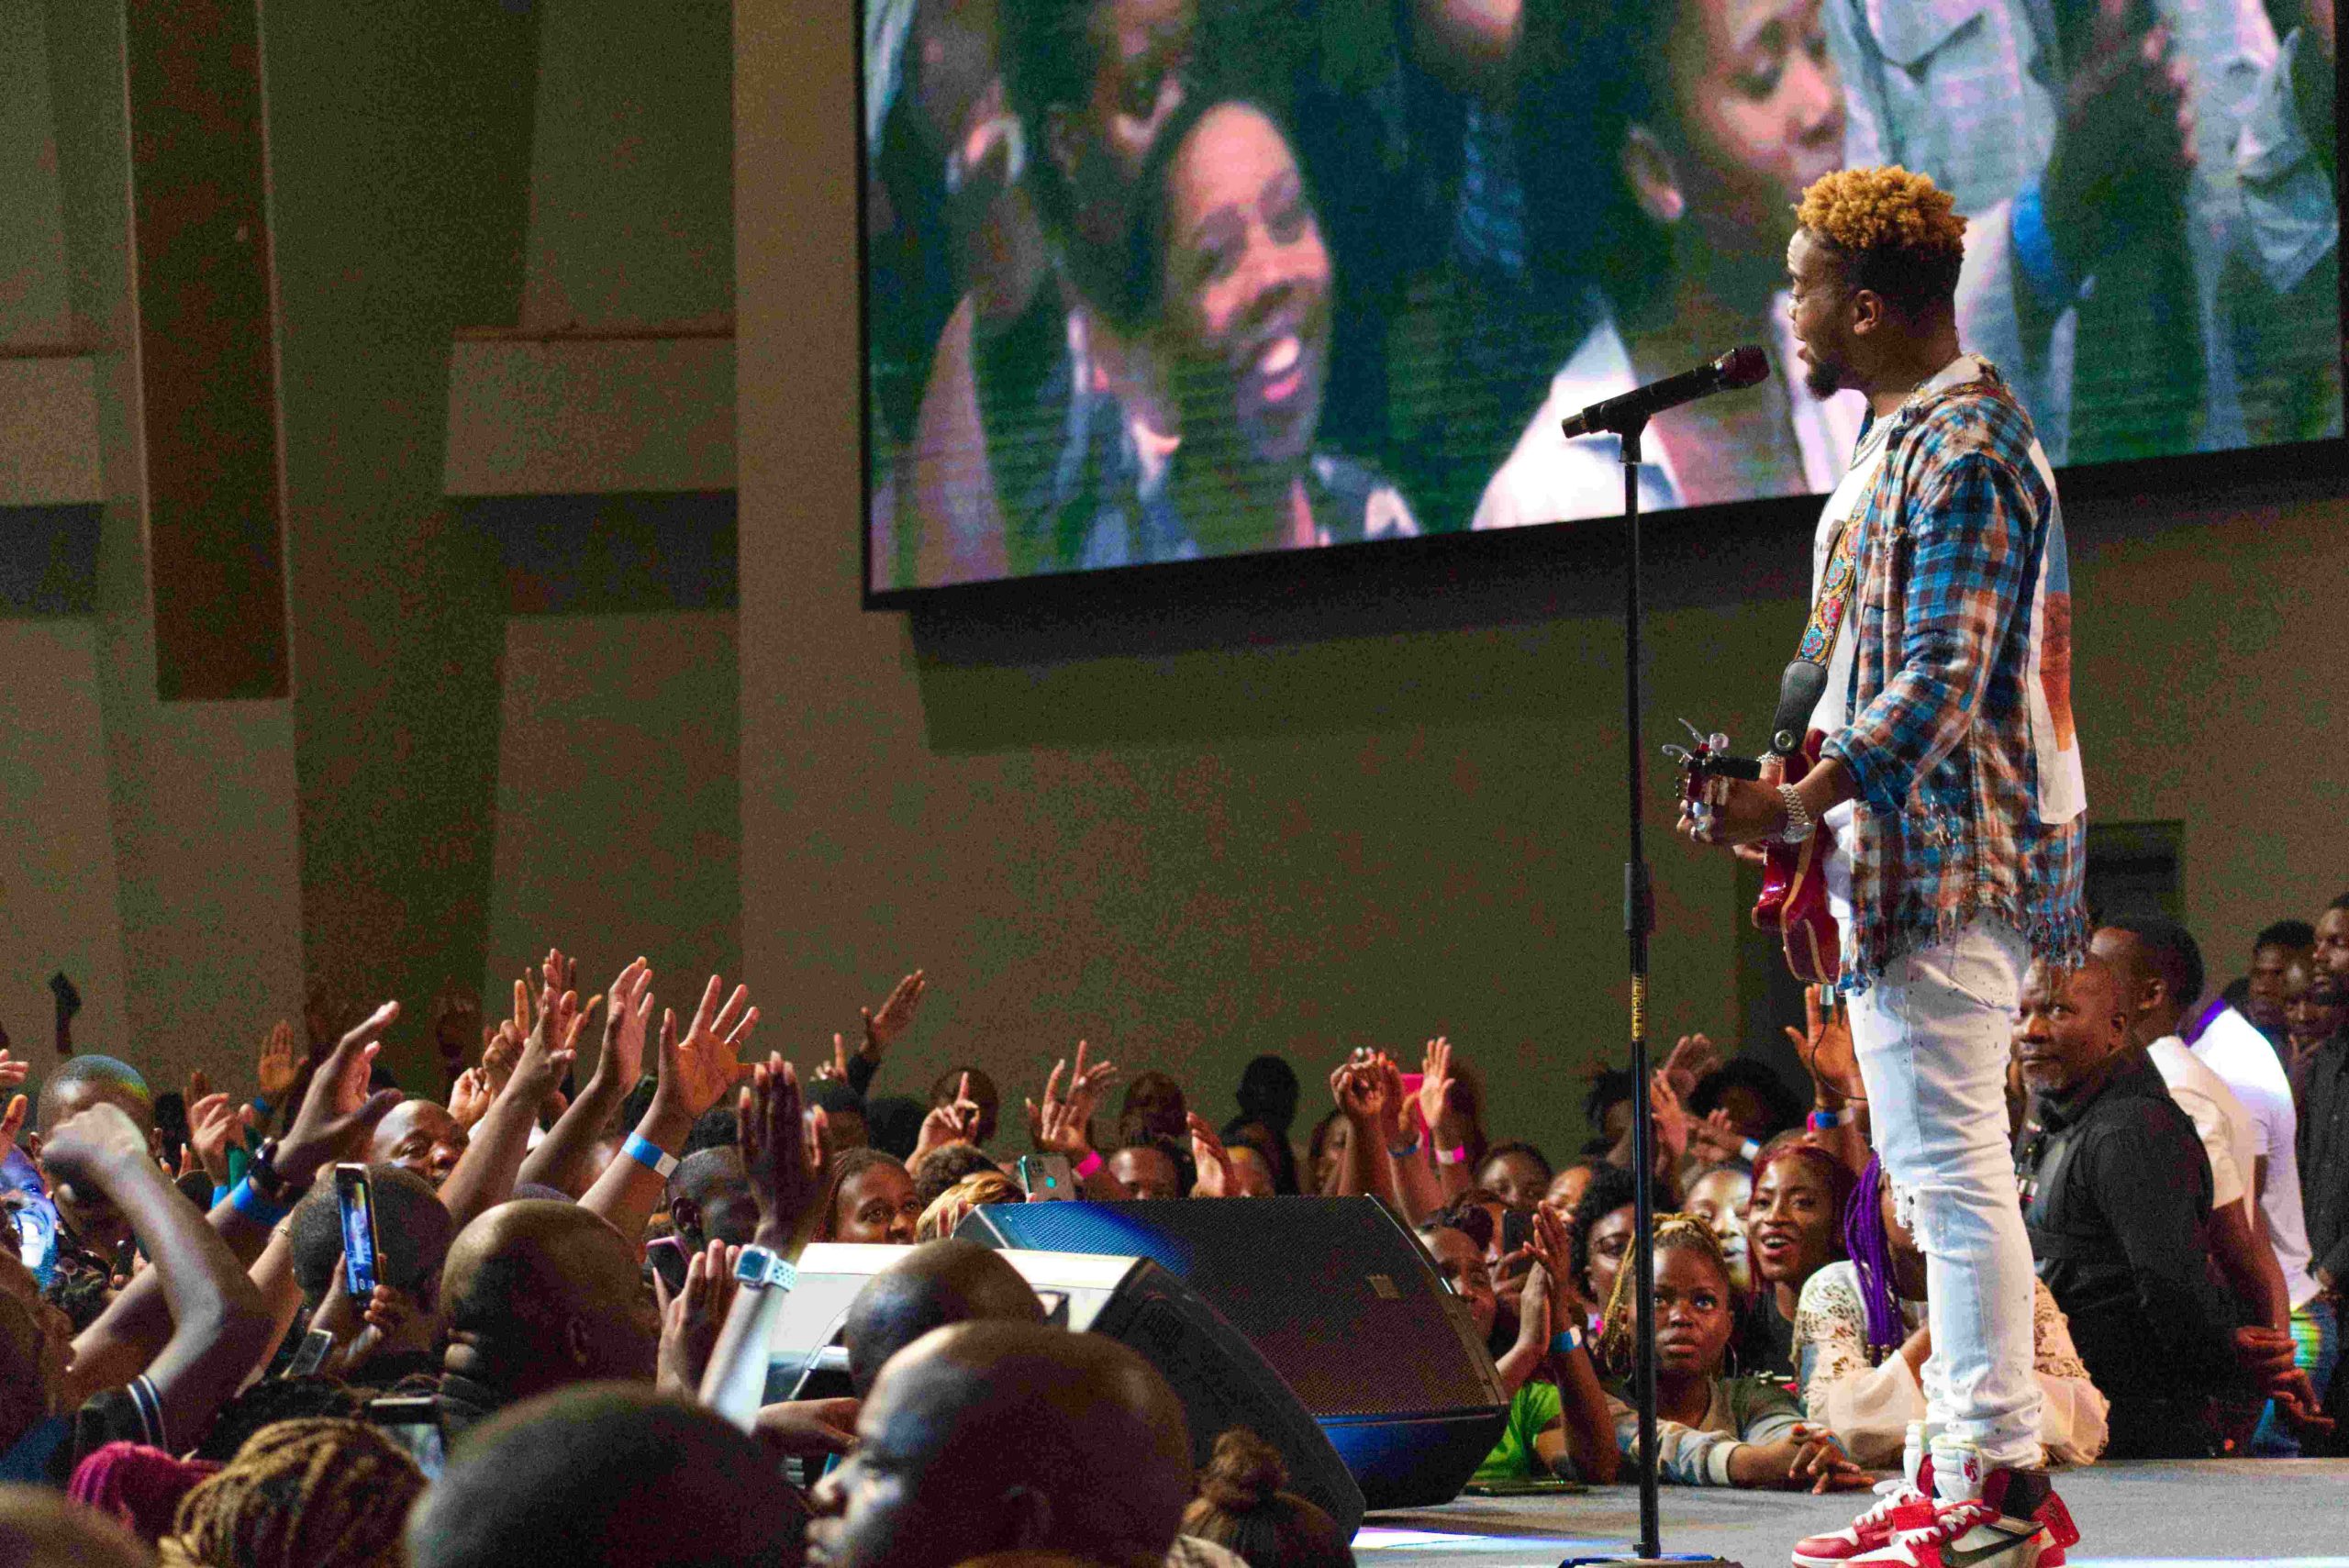 Travis Greene puts on a powerhouse performance at ‘The Shift’ Concert